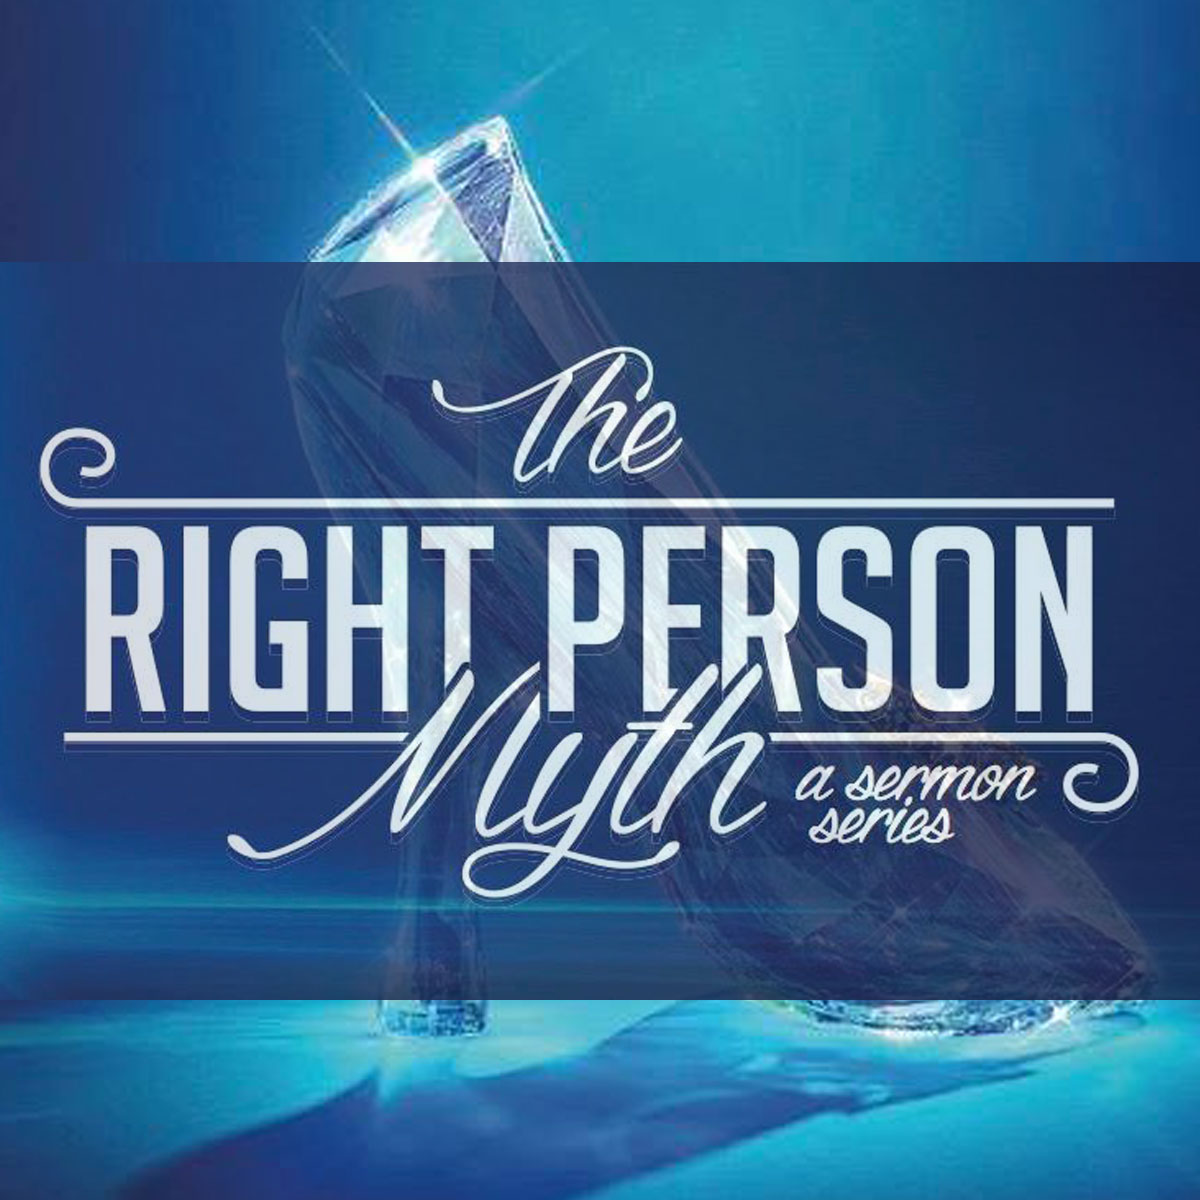 Becoming the Right Person